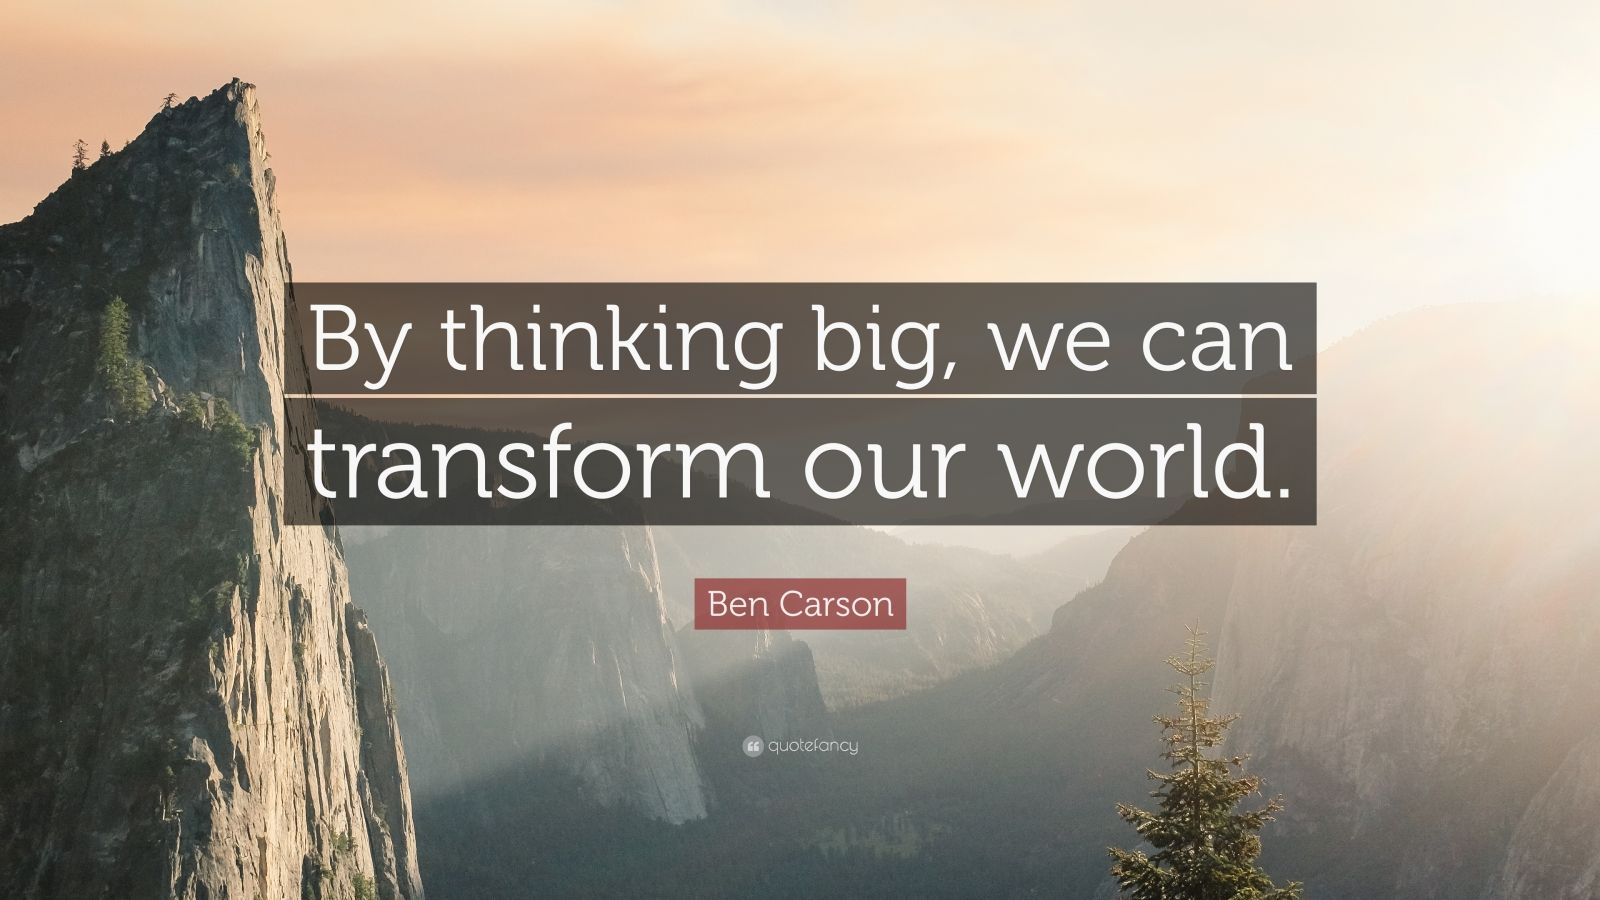 when was think big by ben carson published